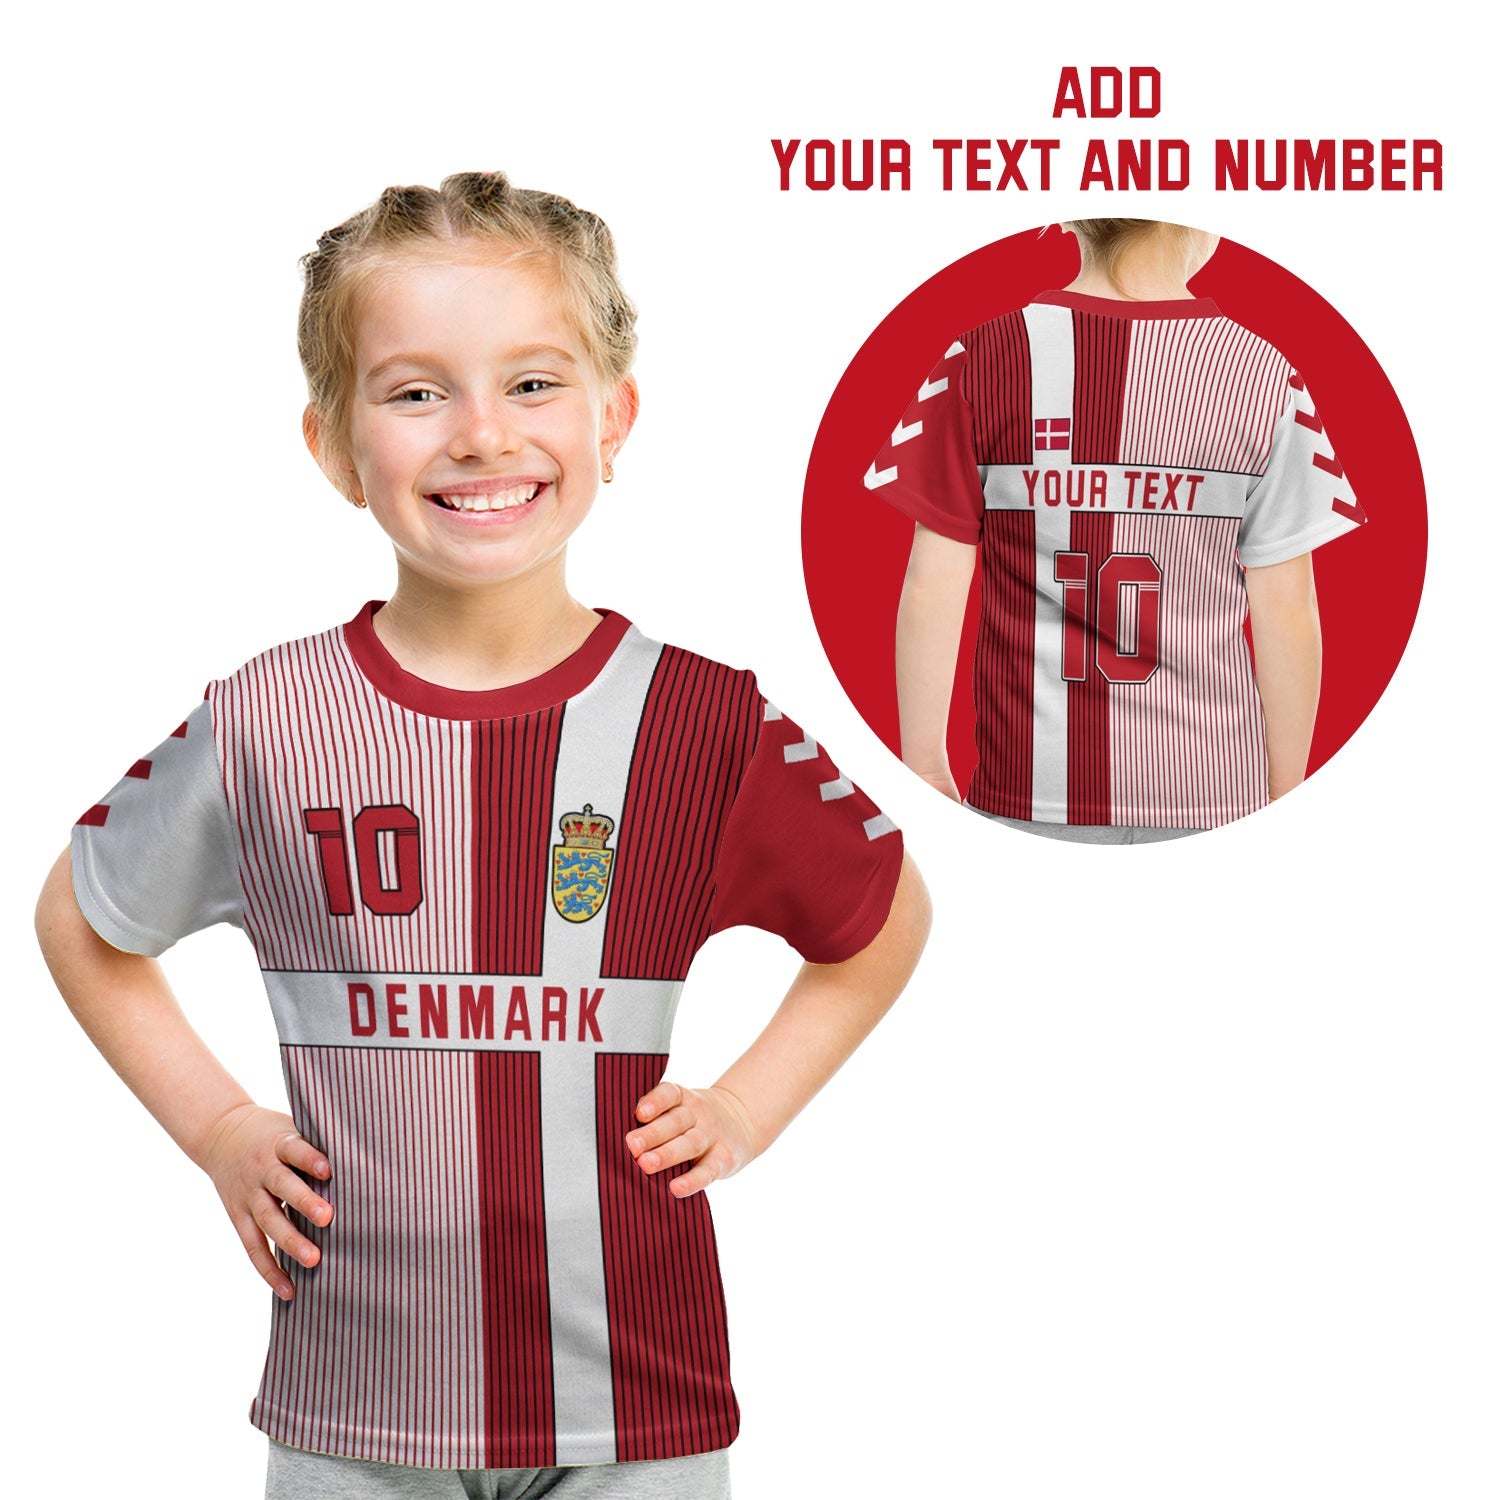 custom-personalised-denmark-football-t-shirt-kid-come-on-denmark-custom-text-and-number